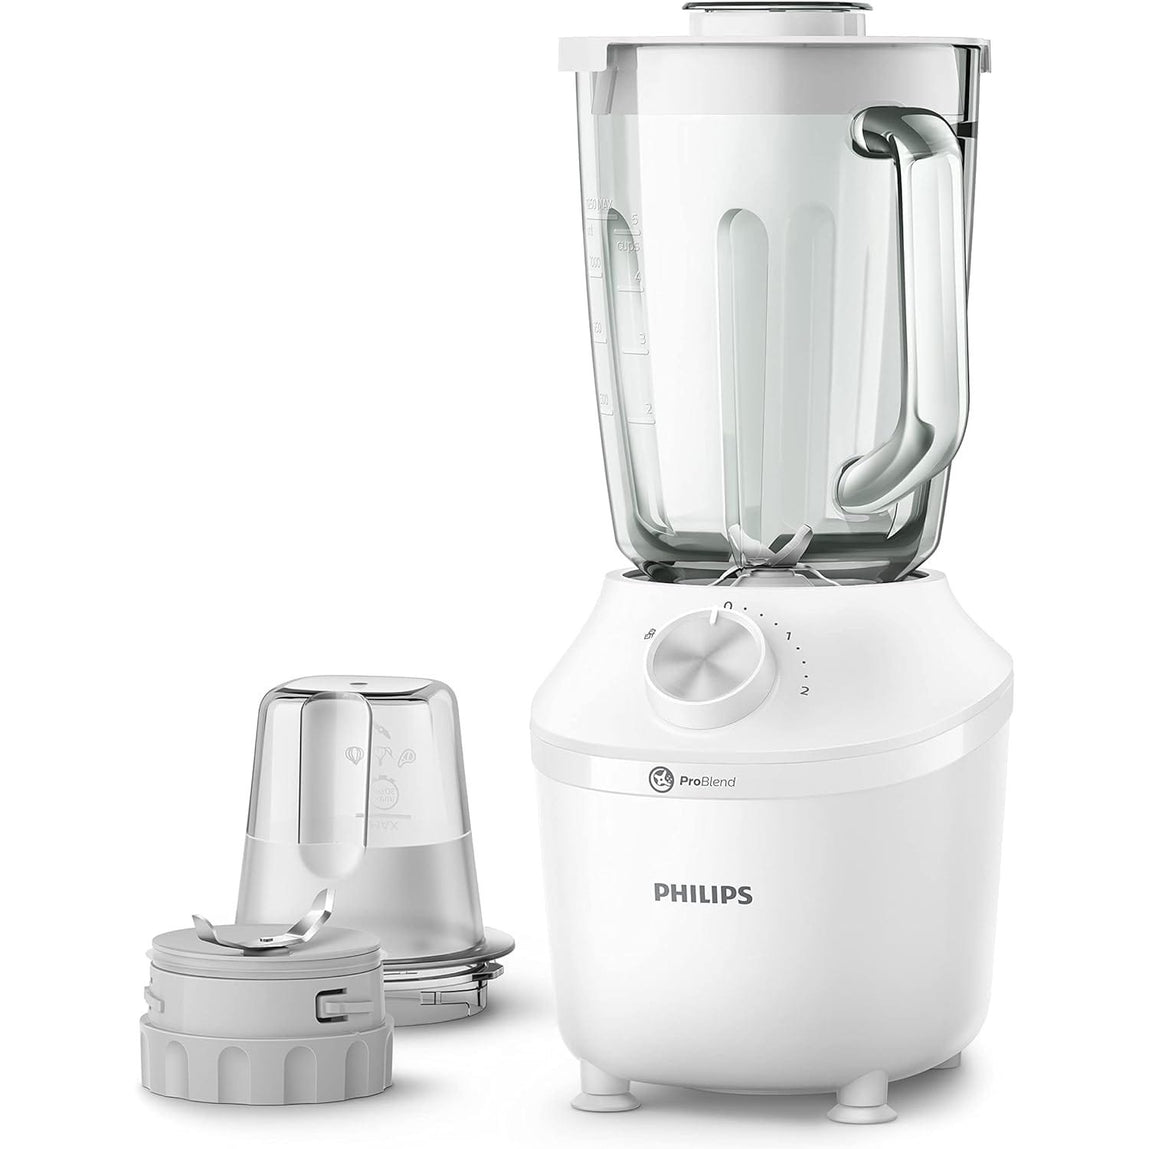 Philips 1.5L Stand Blender 400W - HR2102 | Supply Master Accra, Ghana Kitchen Appliances Buy Tools hardware Building materials